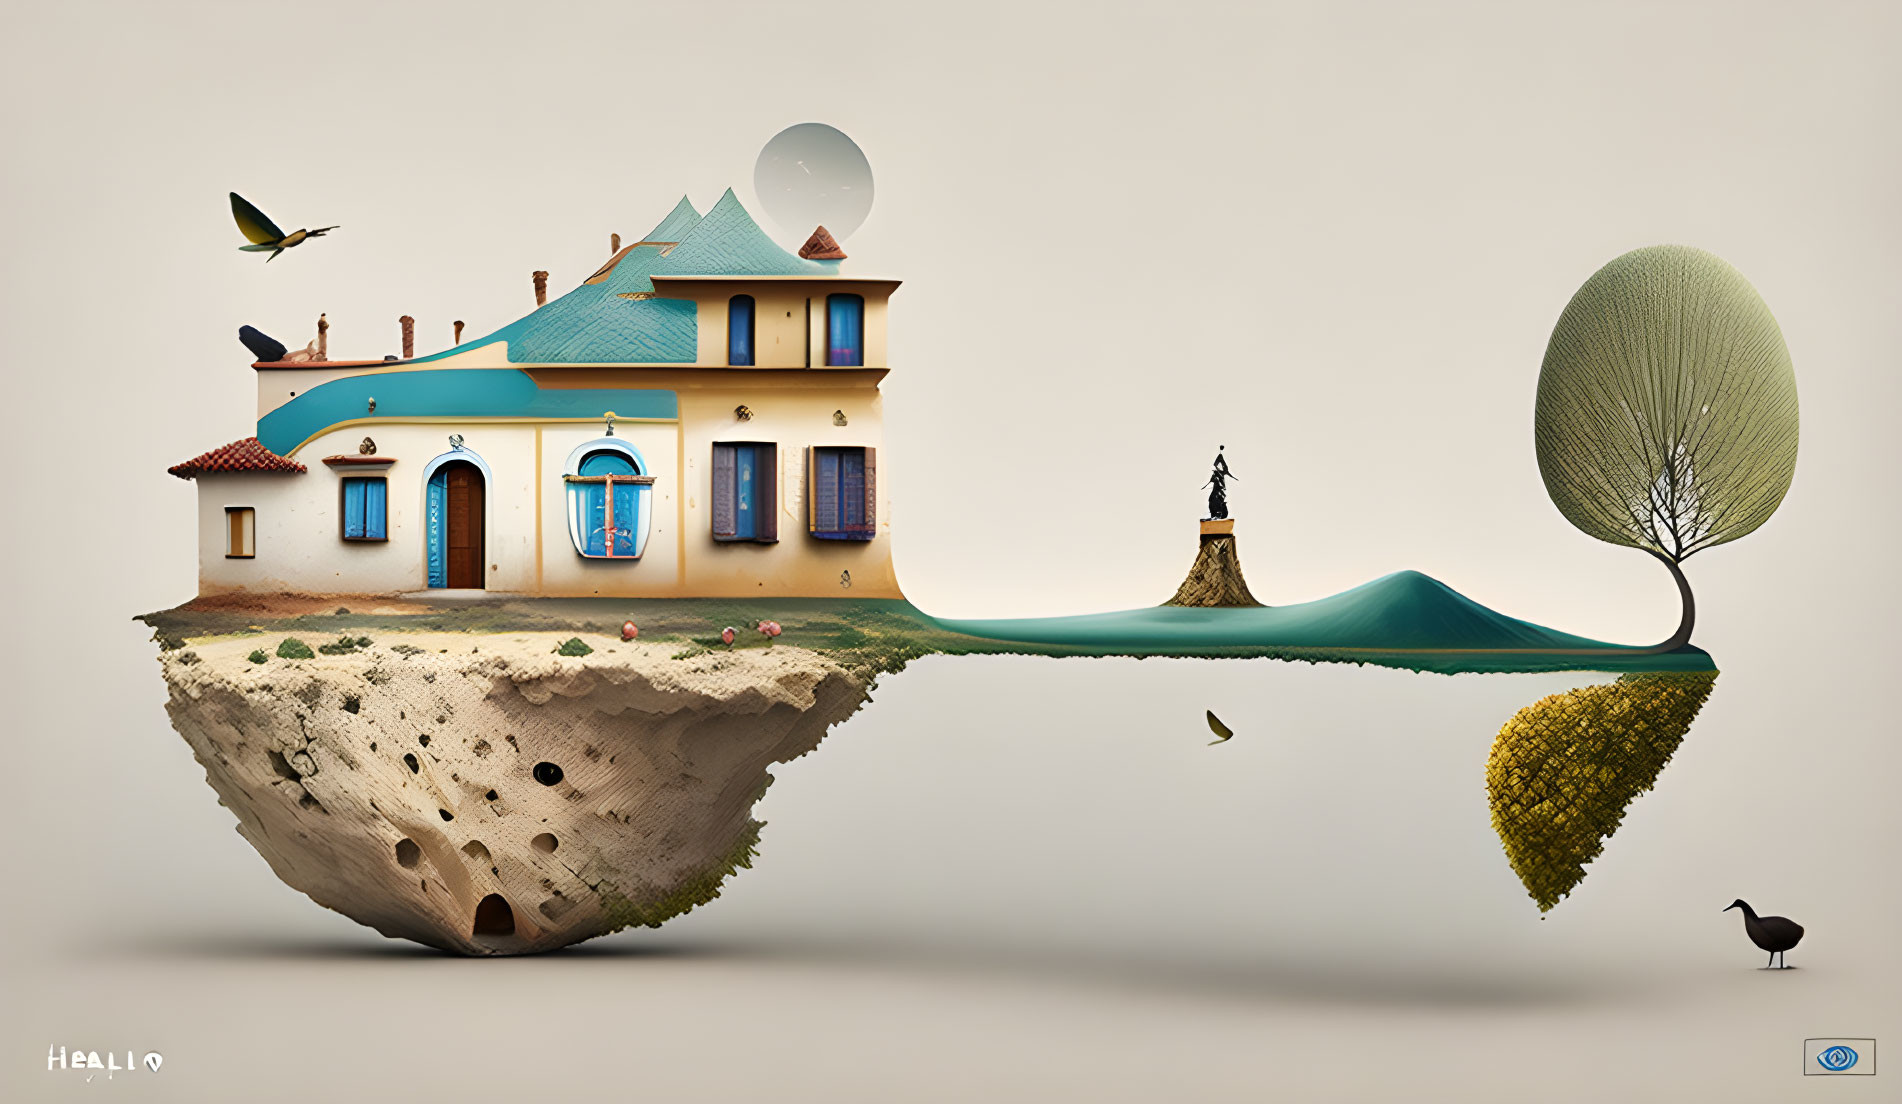 Whimsical floating island with unique house, tree, birds, and cat on roof